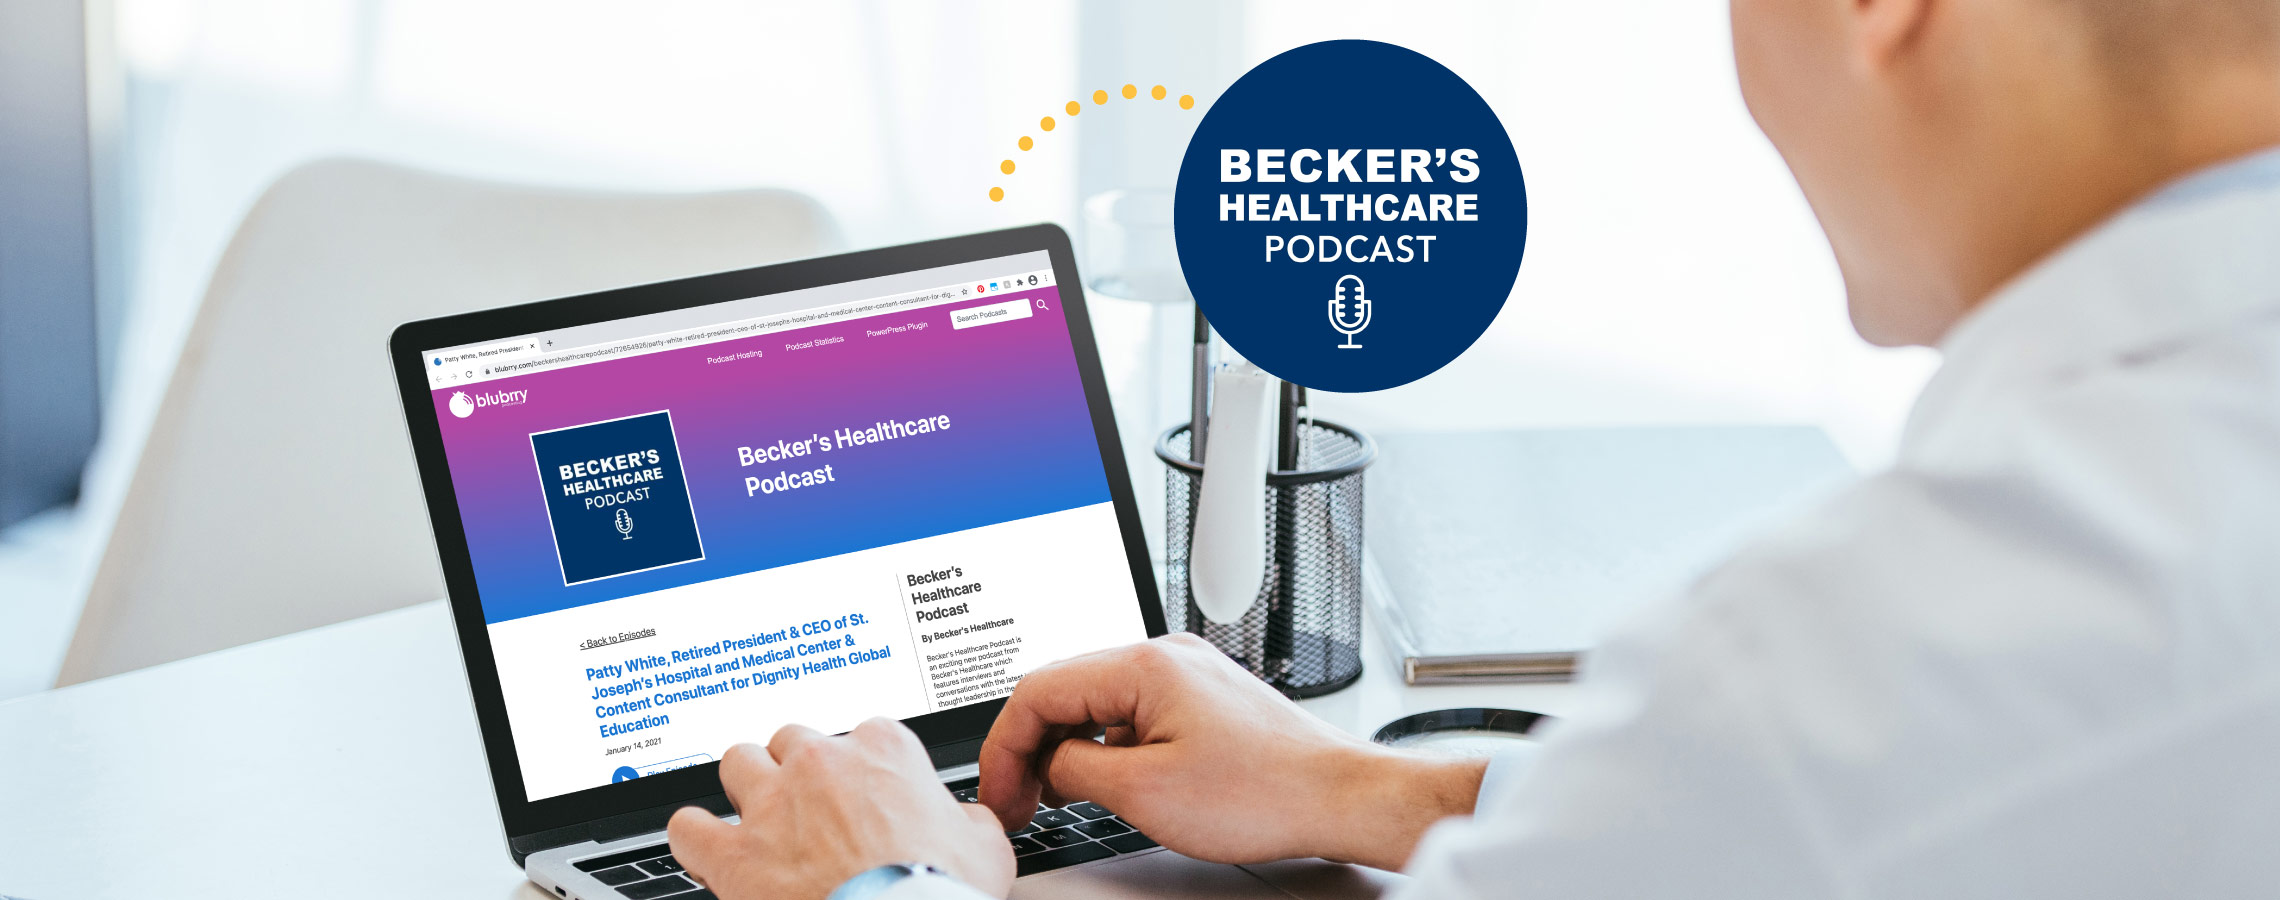 OpusVi expert Patty White featured on Becker’s Healthcare Podcast